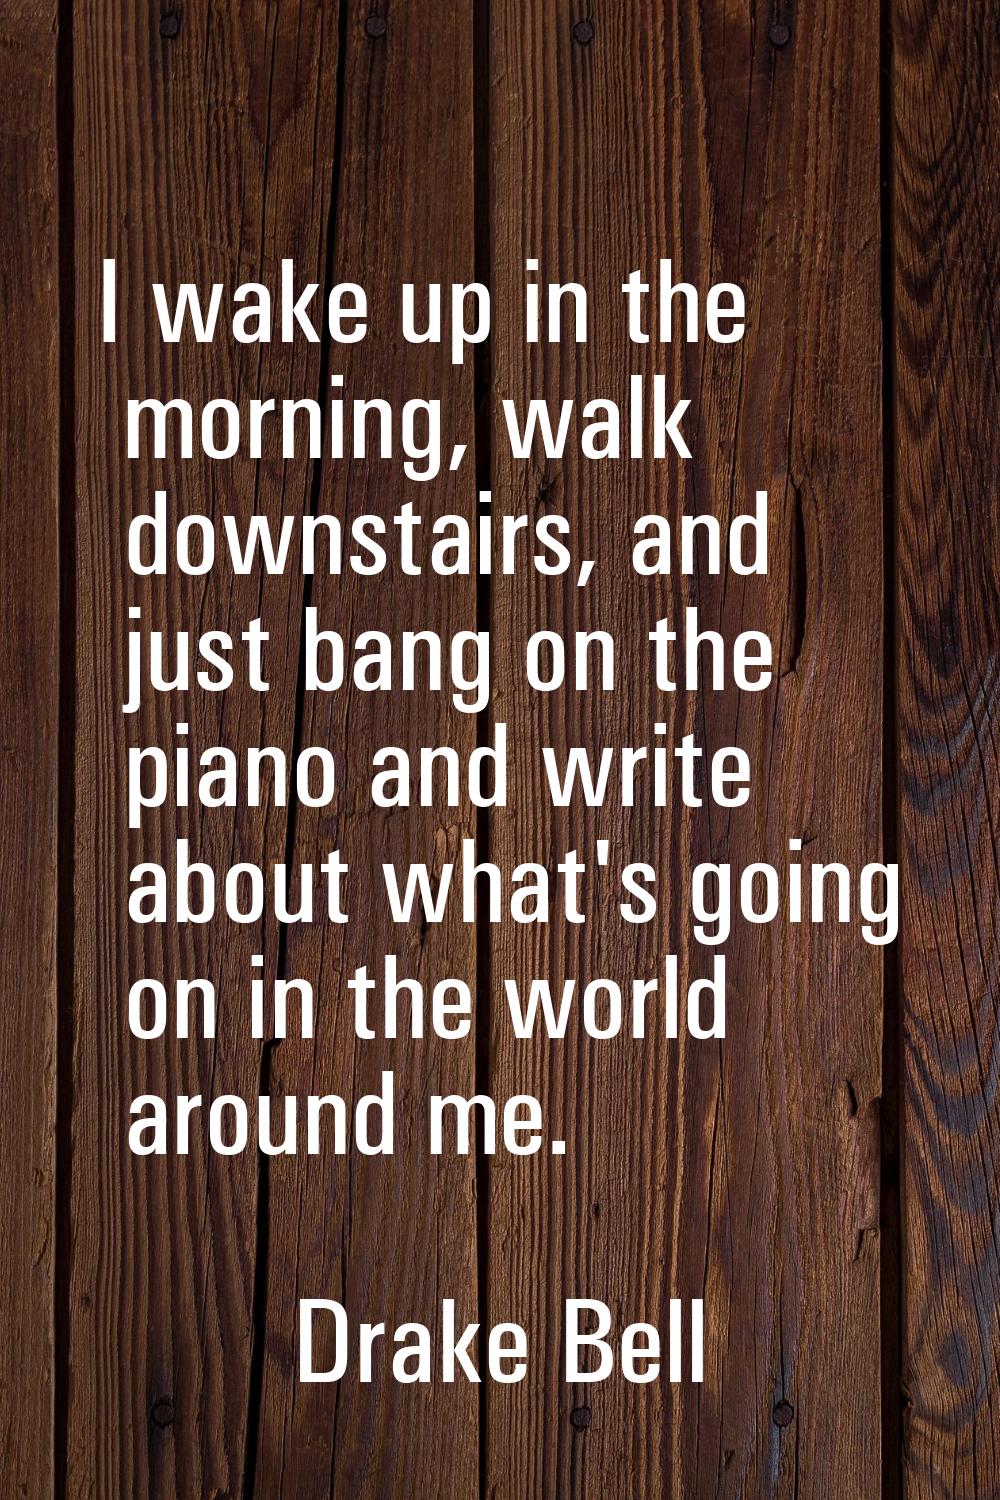 I wake up in the morning, walk downstairs, and just bang on the piano and write about what's going 